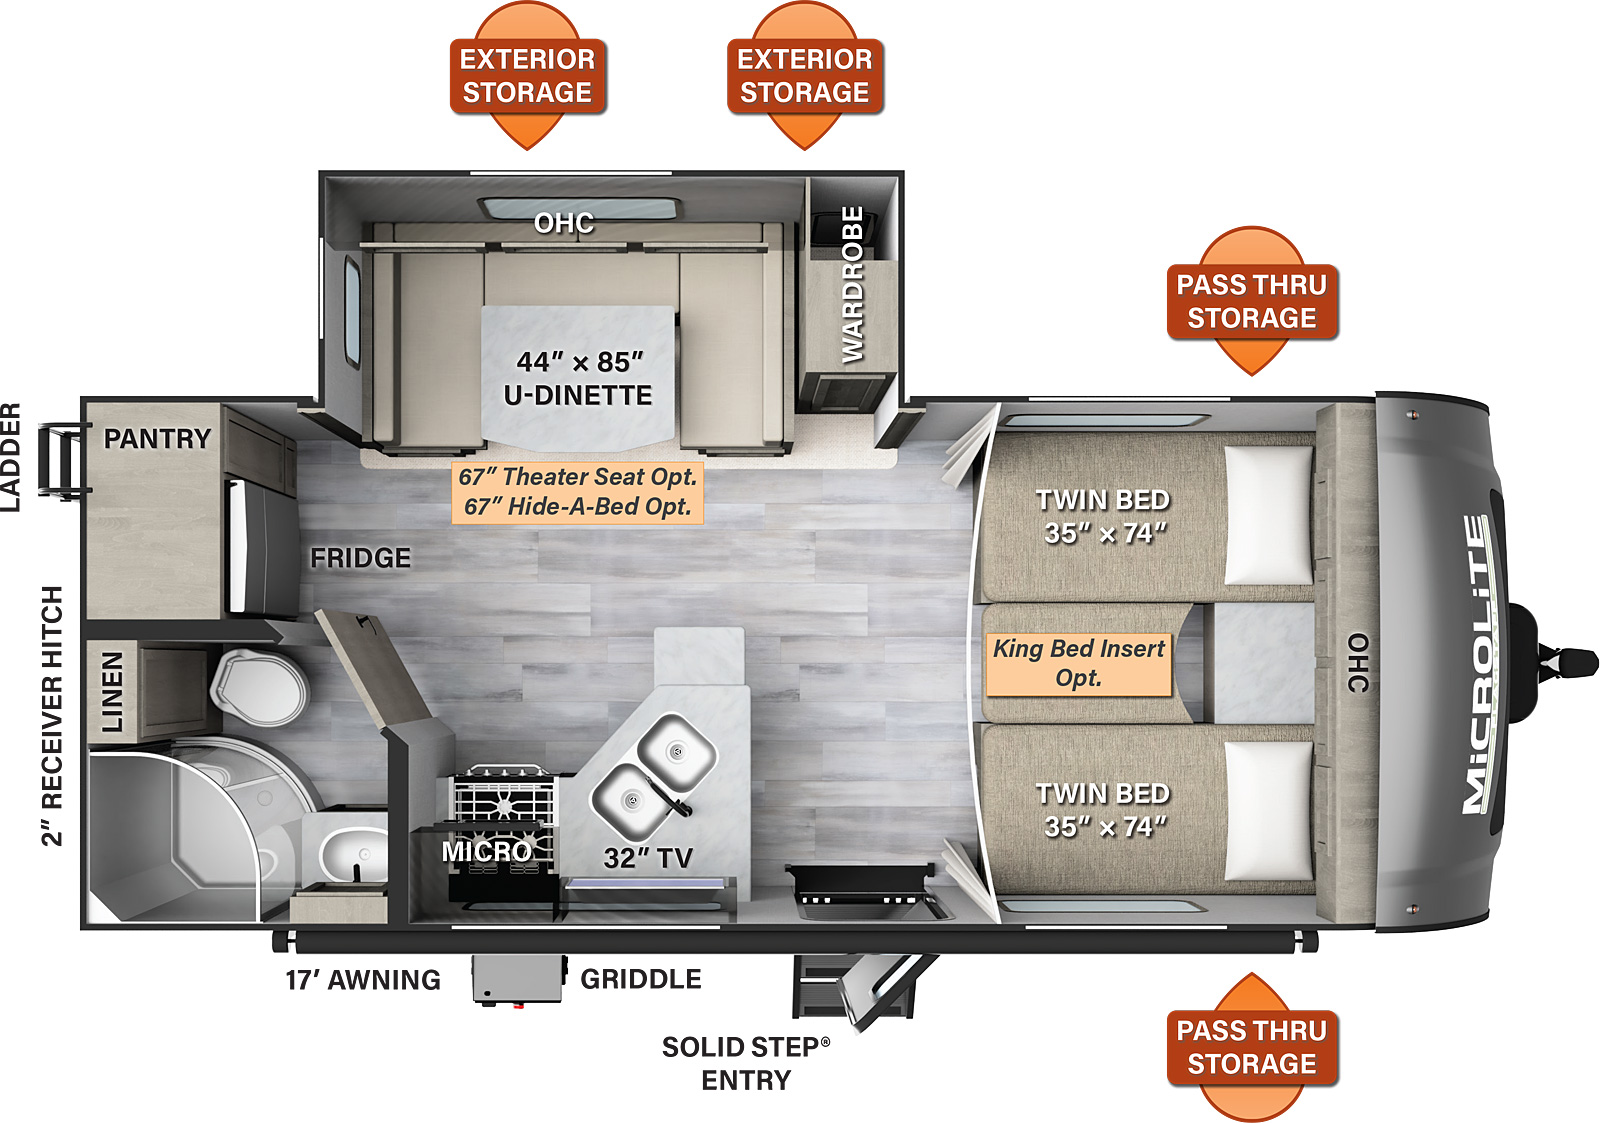 The 22TBS has one slide out on the off-door side, along with one entry door. Exterior features include a 17 foot awning, front pass thru storage, off-door side exterior storage, griddle, rear ladder, and 2 inch receiver hitch. Interior layout from front to back: front bedroom with two twin beds (king bed insert optional), and overhead cabinets; off-door side slide out containing a U-dinette (theater seating or hide-a-bed optional) and a wardrobe; kitchen living area with TV, double sinks, stove, and microwave; bathroom, refrigerator, and pantry in the rear.